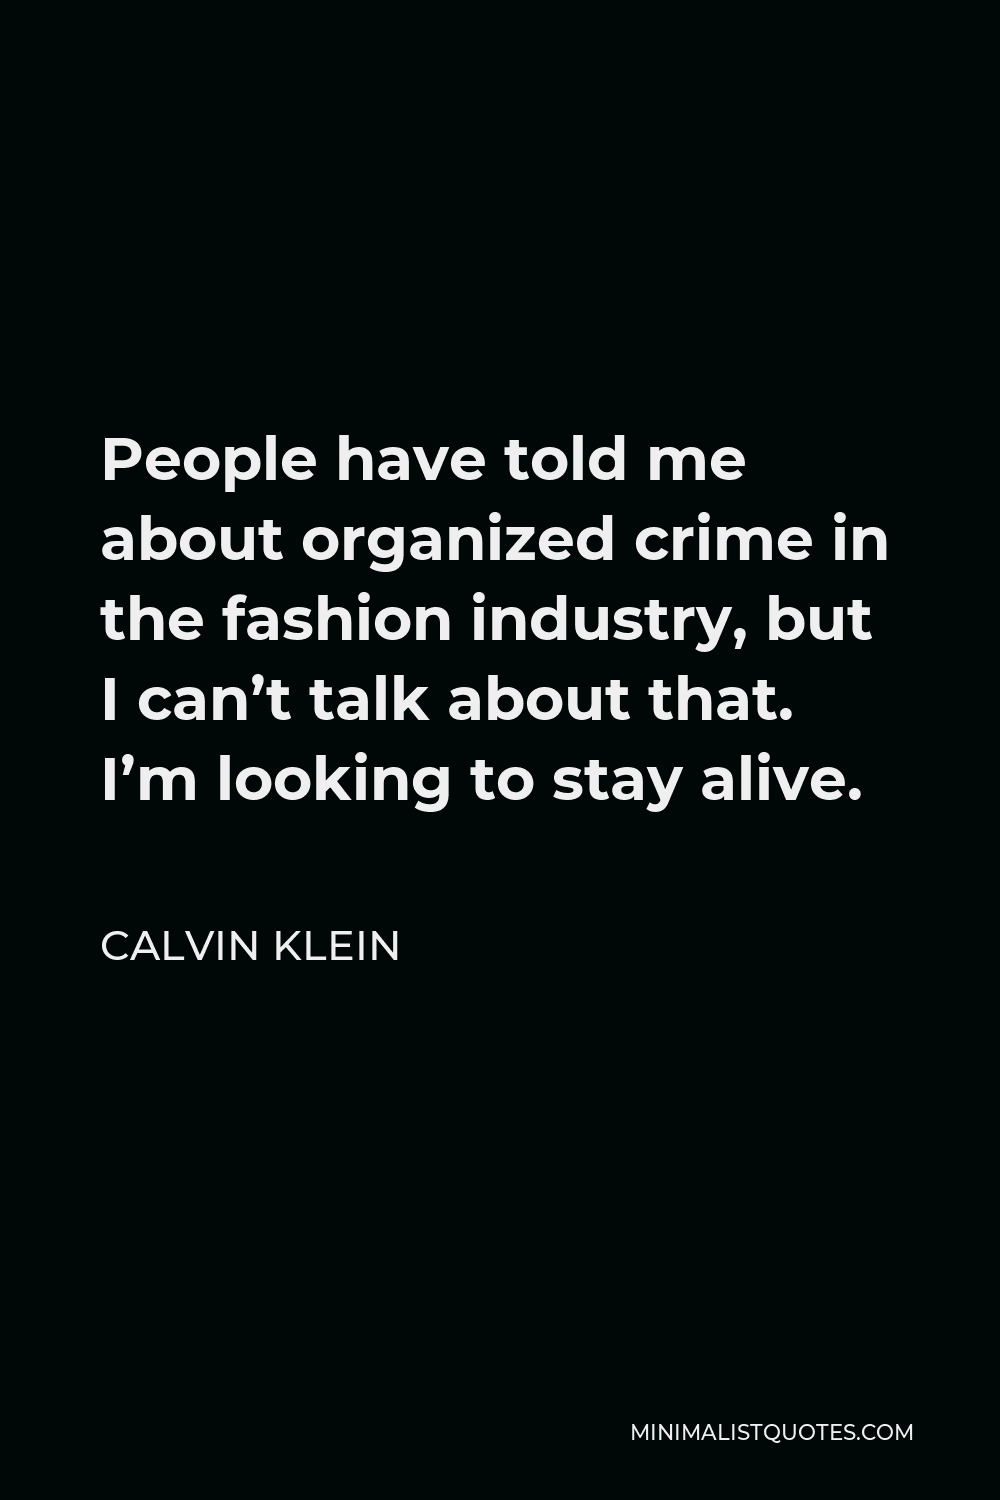 Calvin Klein Quote - People have told me about organized crime in the fashion industry, but I can’t talk about that. I’m looking to stay alive.